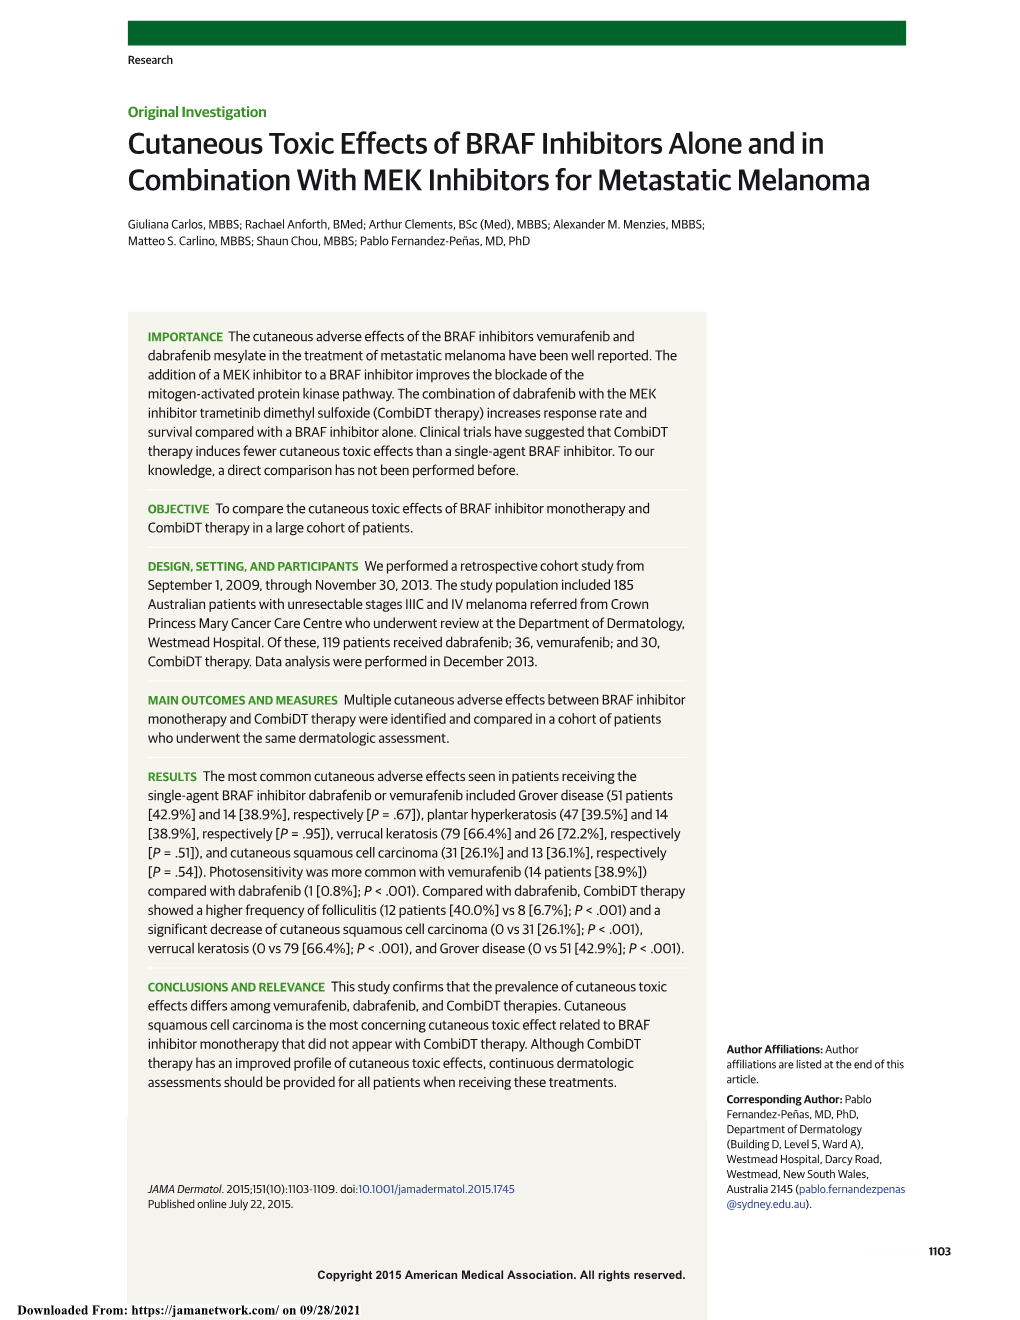 Cutaneous Toxic Effects of BRAF Inhibitors Alone and in Combination with MEK Inhibitors for Metastatic Melanoma